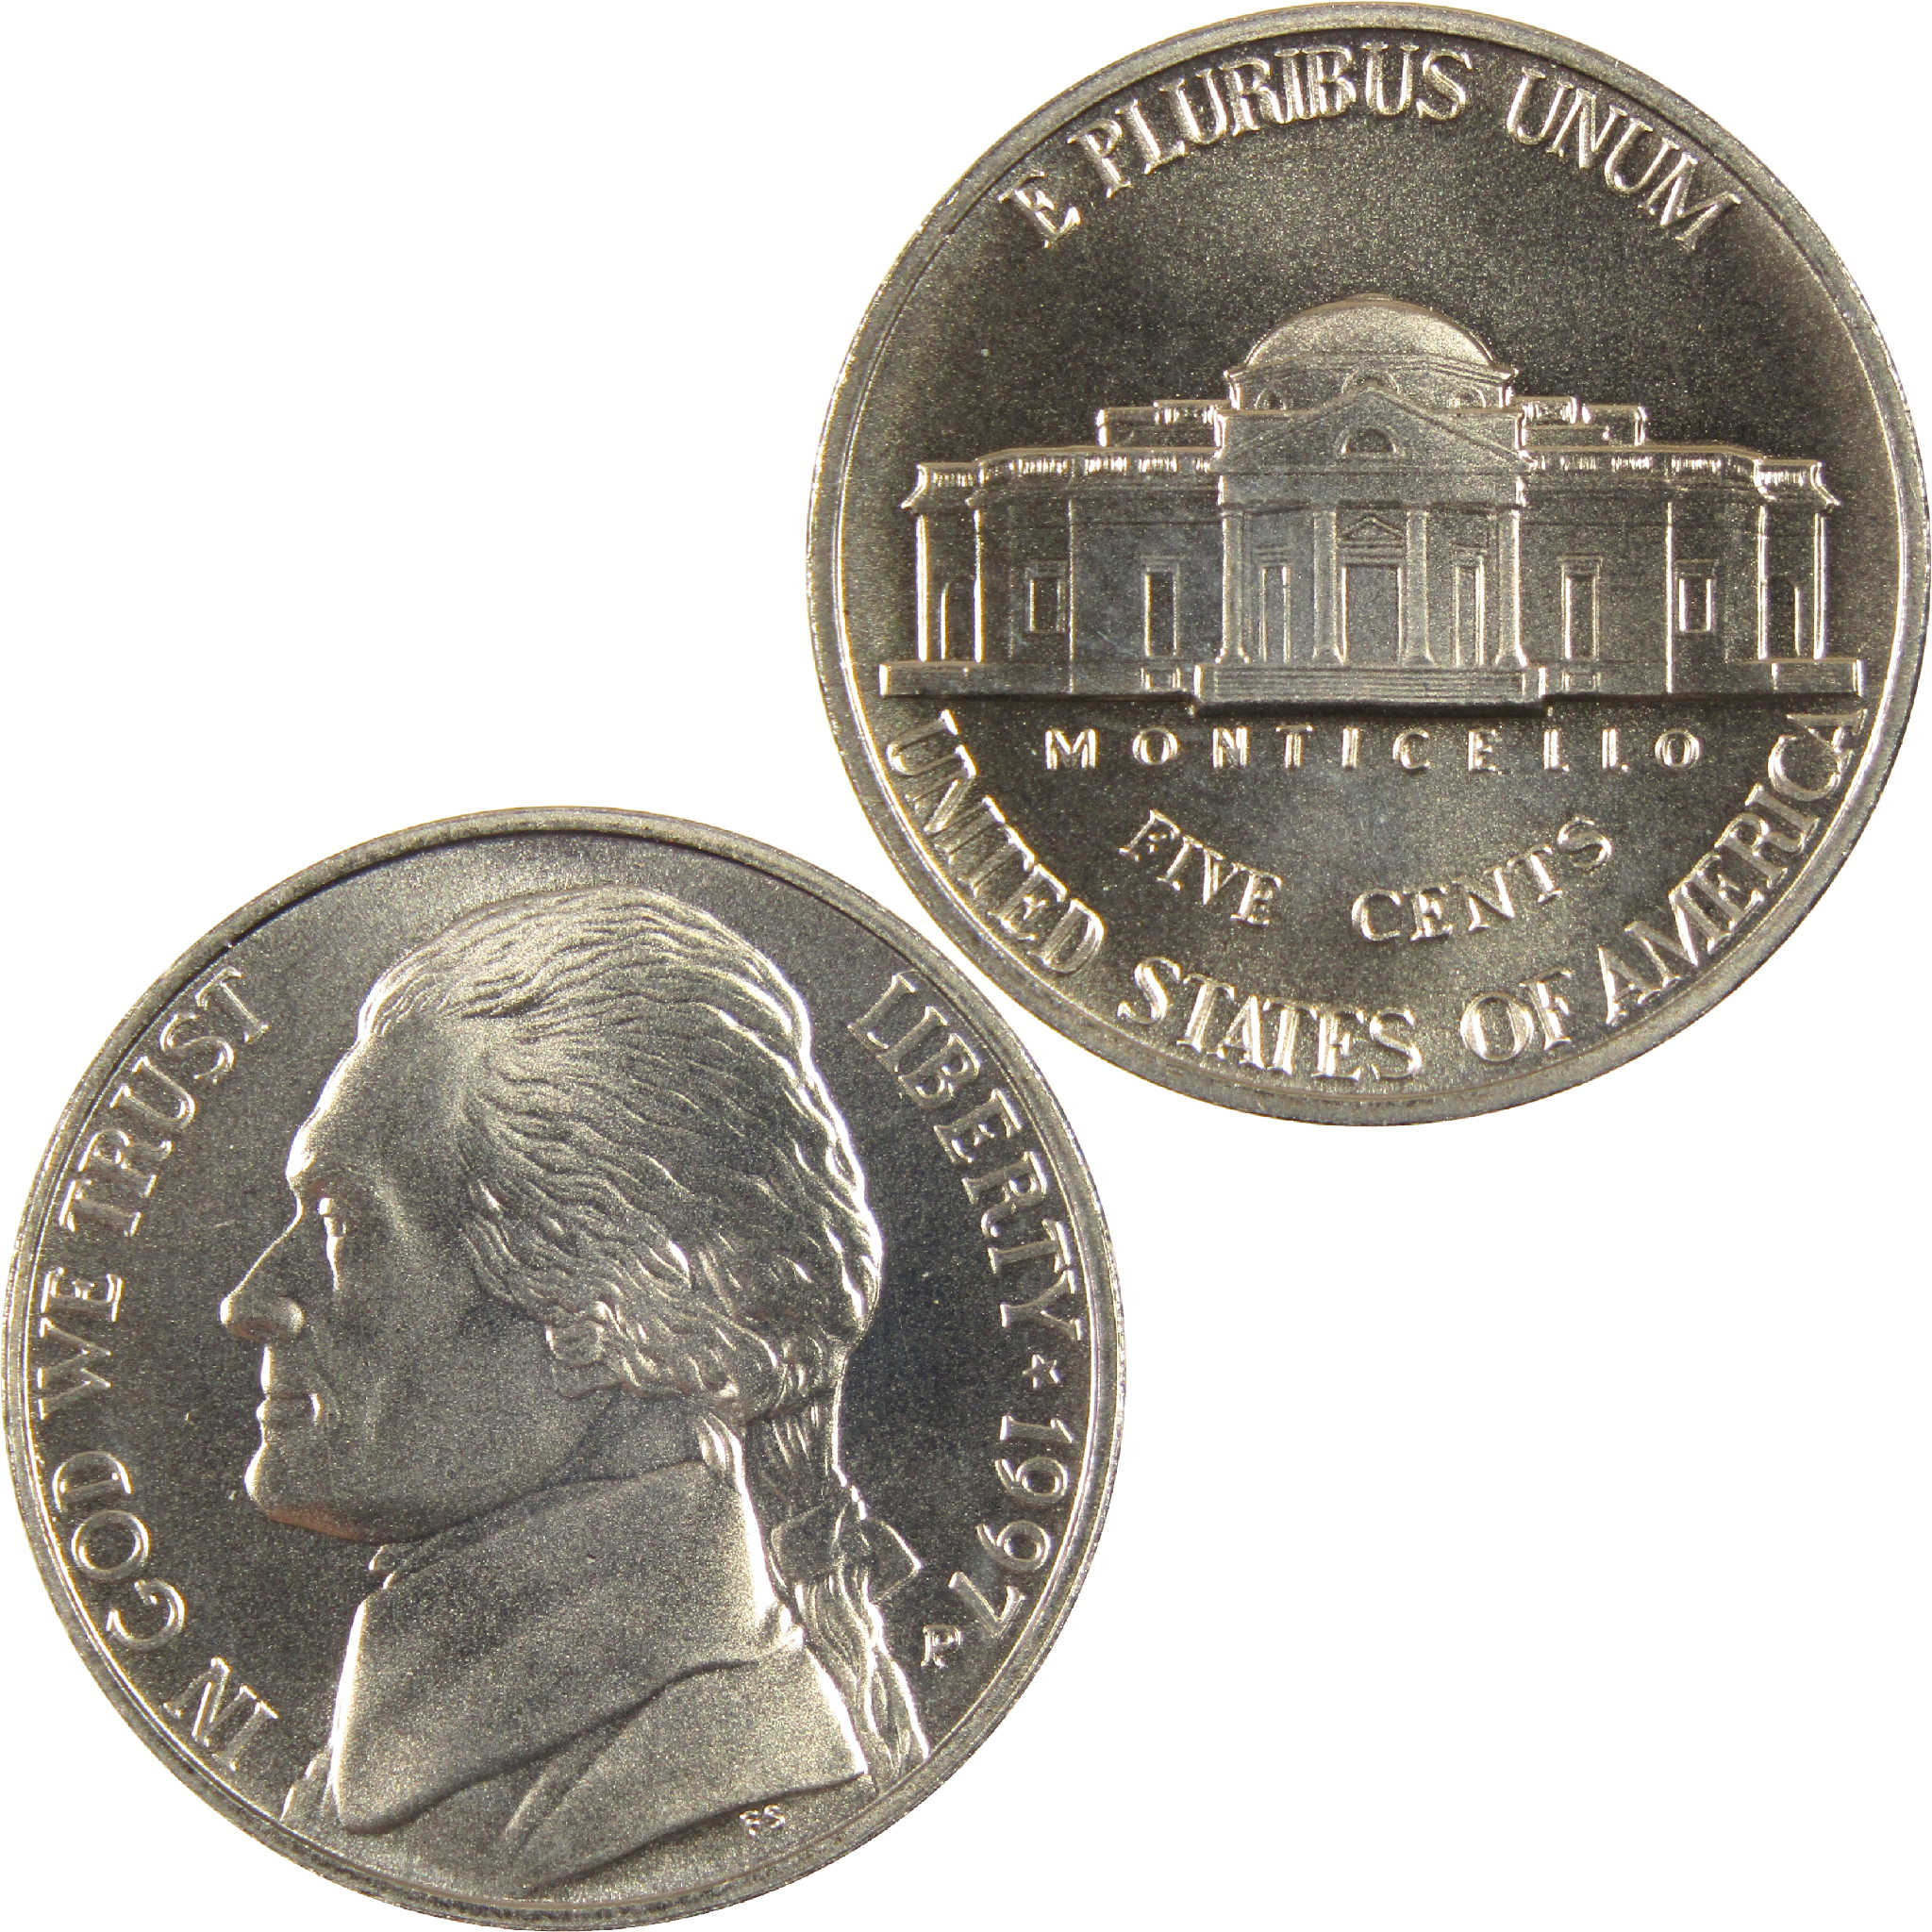 1997 P Jefferson Nickel Uncirculated 5c Coin